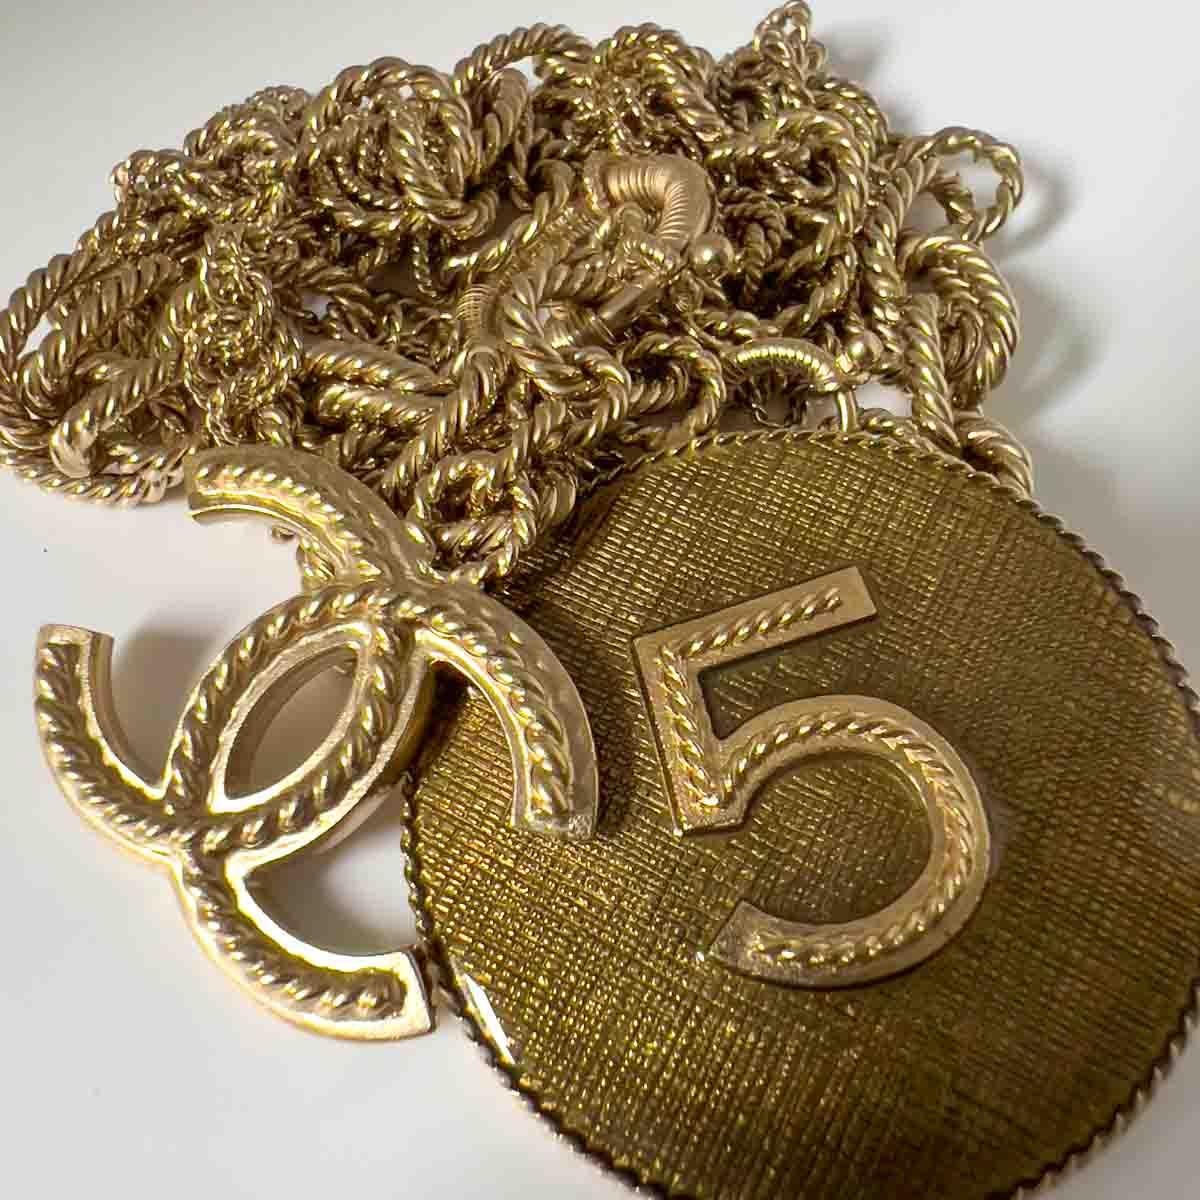 A seriously spectacular Chanel CC Charm Necklace from the Spring Summer 2013 Collection. Crafted in antiqued light gold metal. An intricately designed chunky nautical style rope chain, paying homage to Coco's love affair with the sea, gives way to